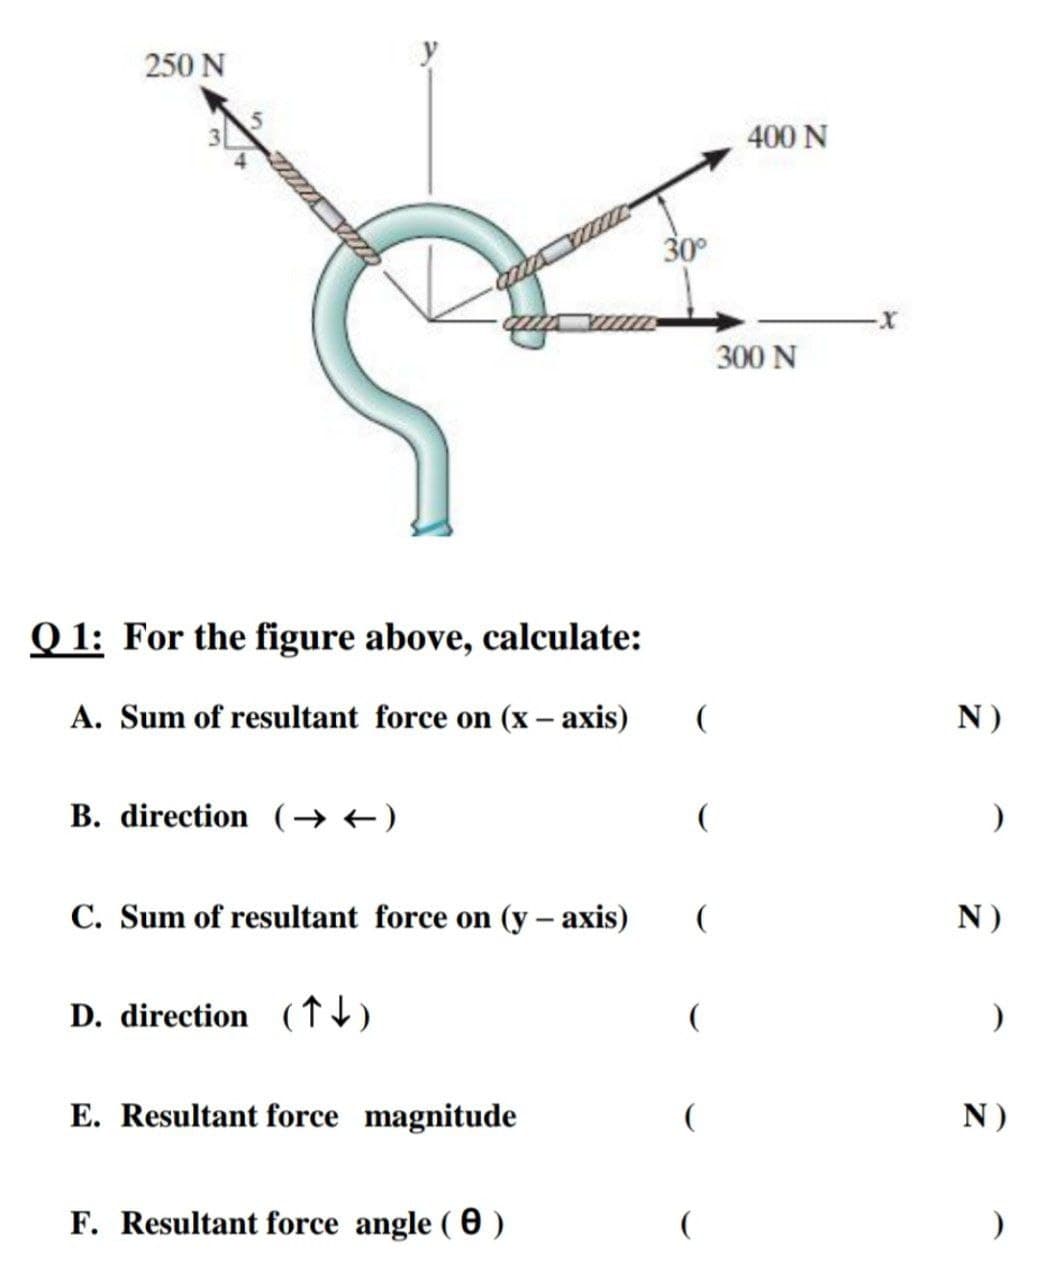 250 N
400 N
30°
300 N
Q 1: For the figure above, calculate:
A. Sum of resultant force on (x – axis)
N)
B. direction (→ +)
C. Sum of resultant force on (y – axis)
N)
D. direction (↑)
(
E. Resultant force magnitude
N)
F. Resultant force angle ( 0 )
